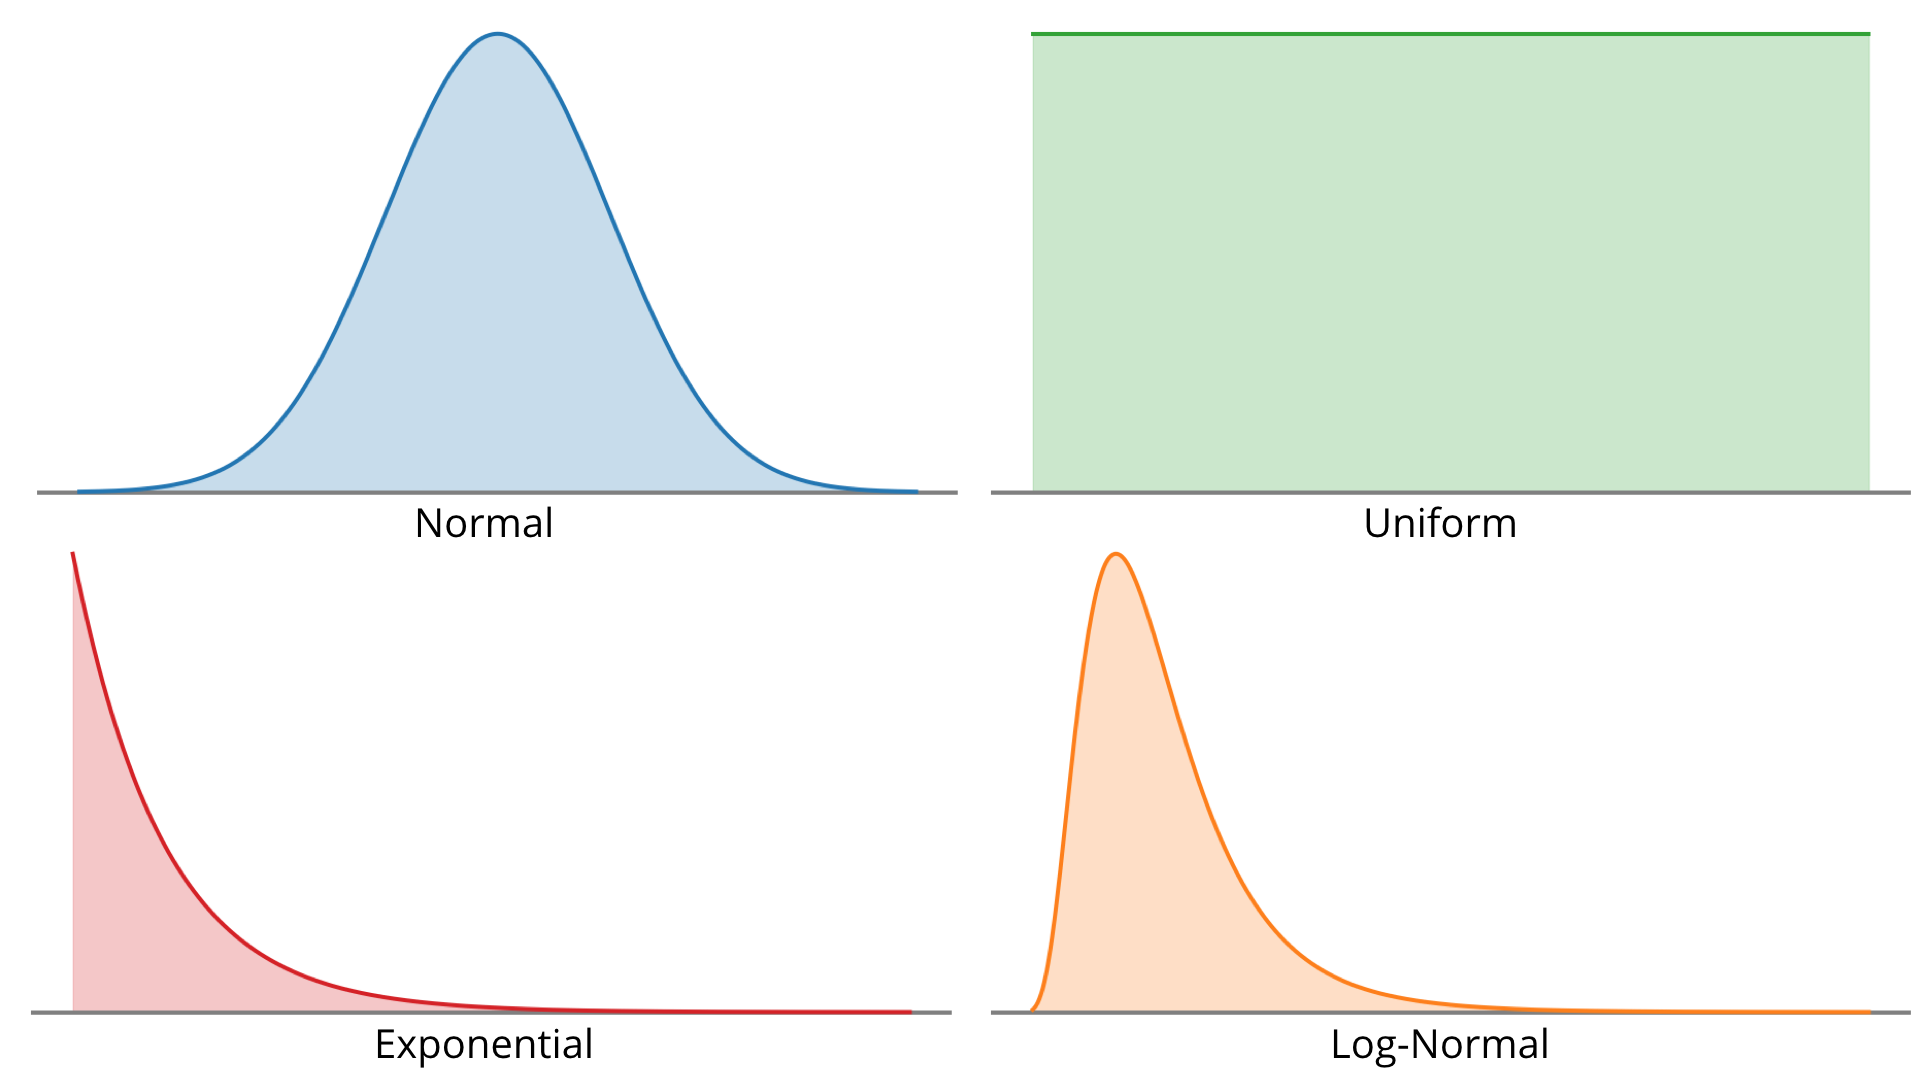 Probability Density Functions (PDFs) of common distributions